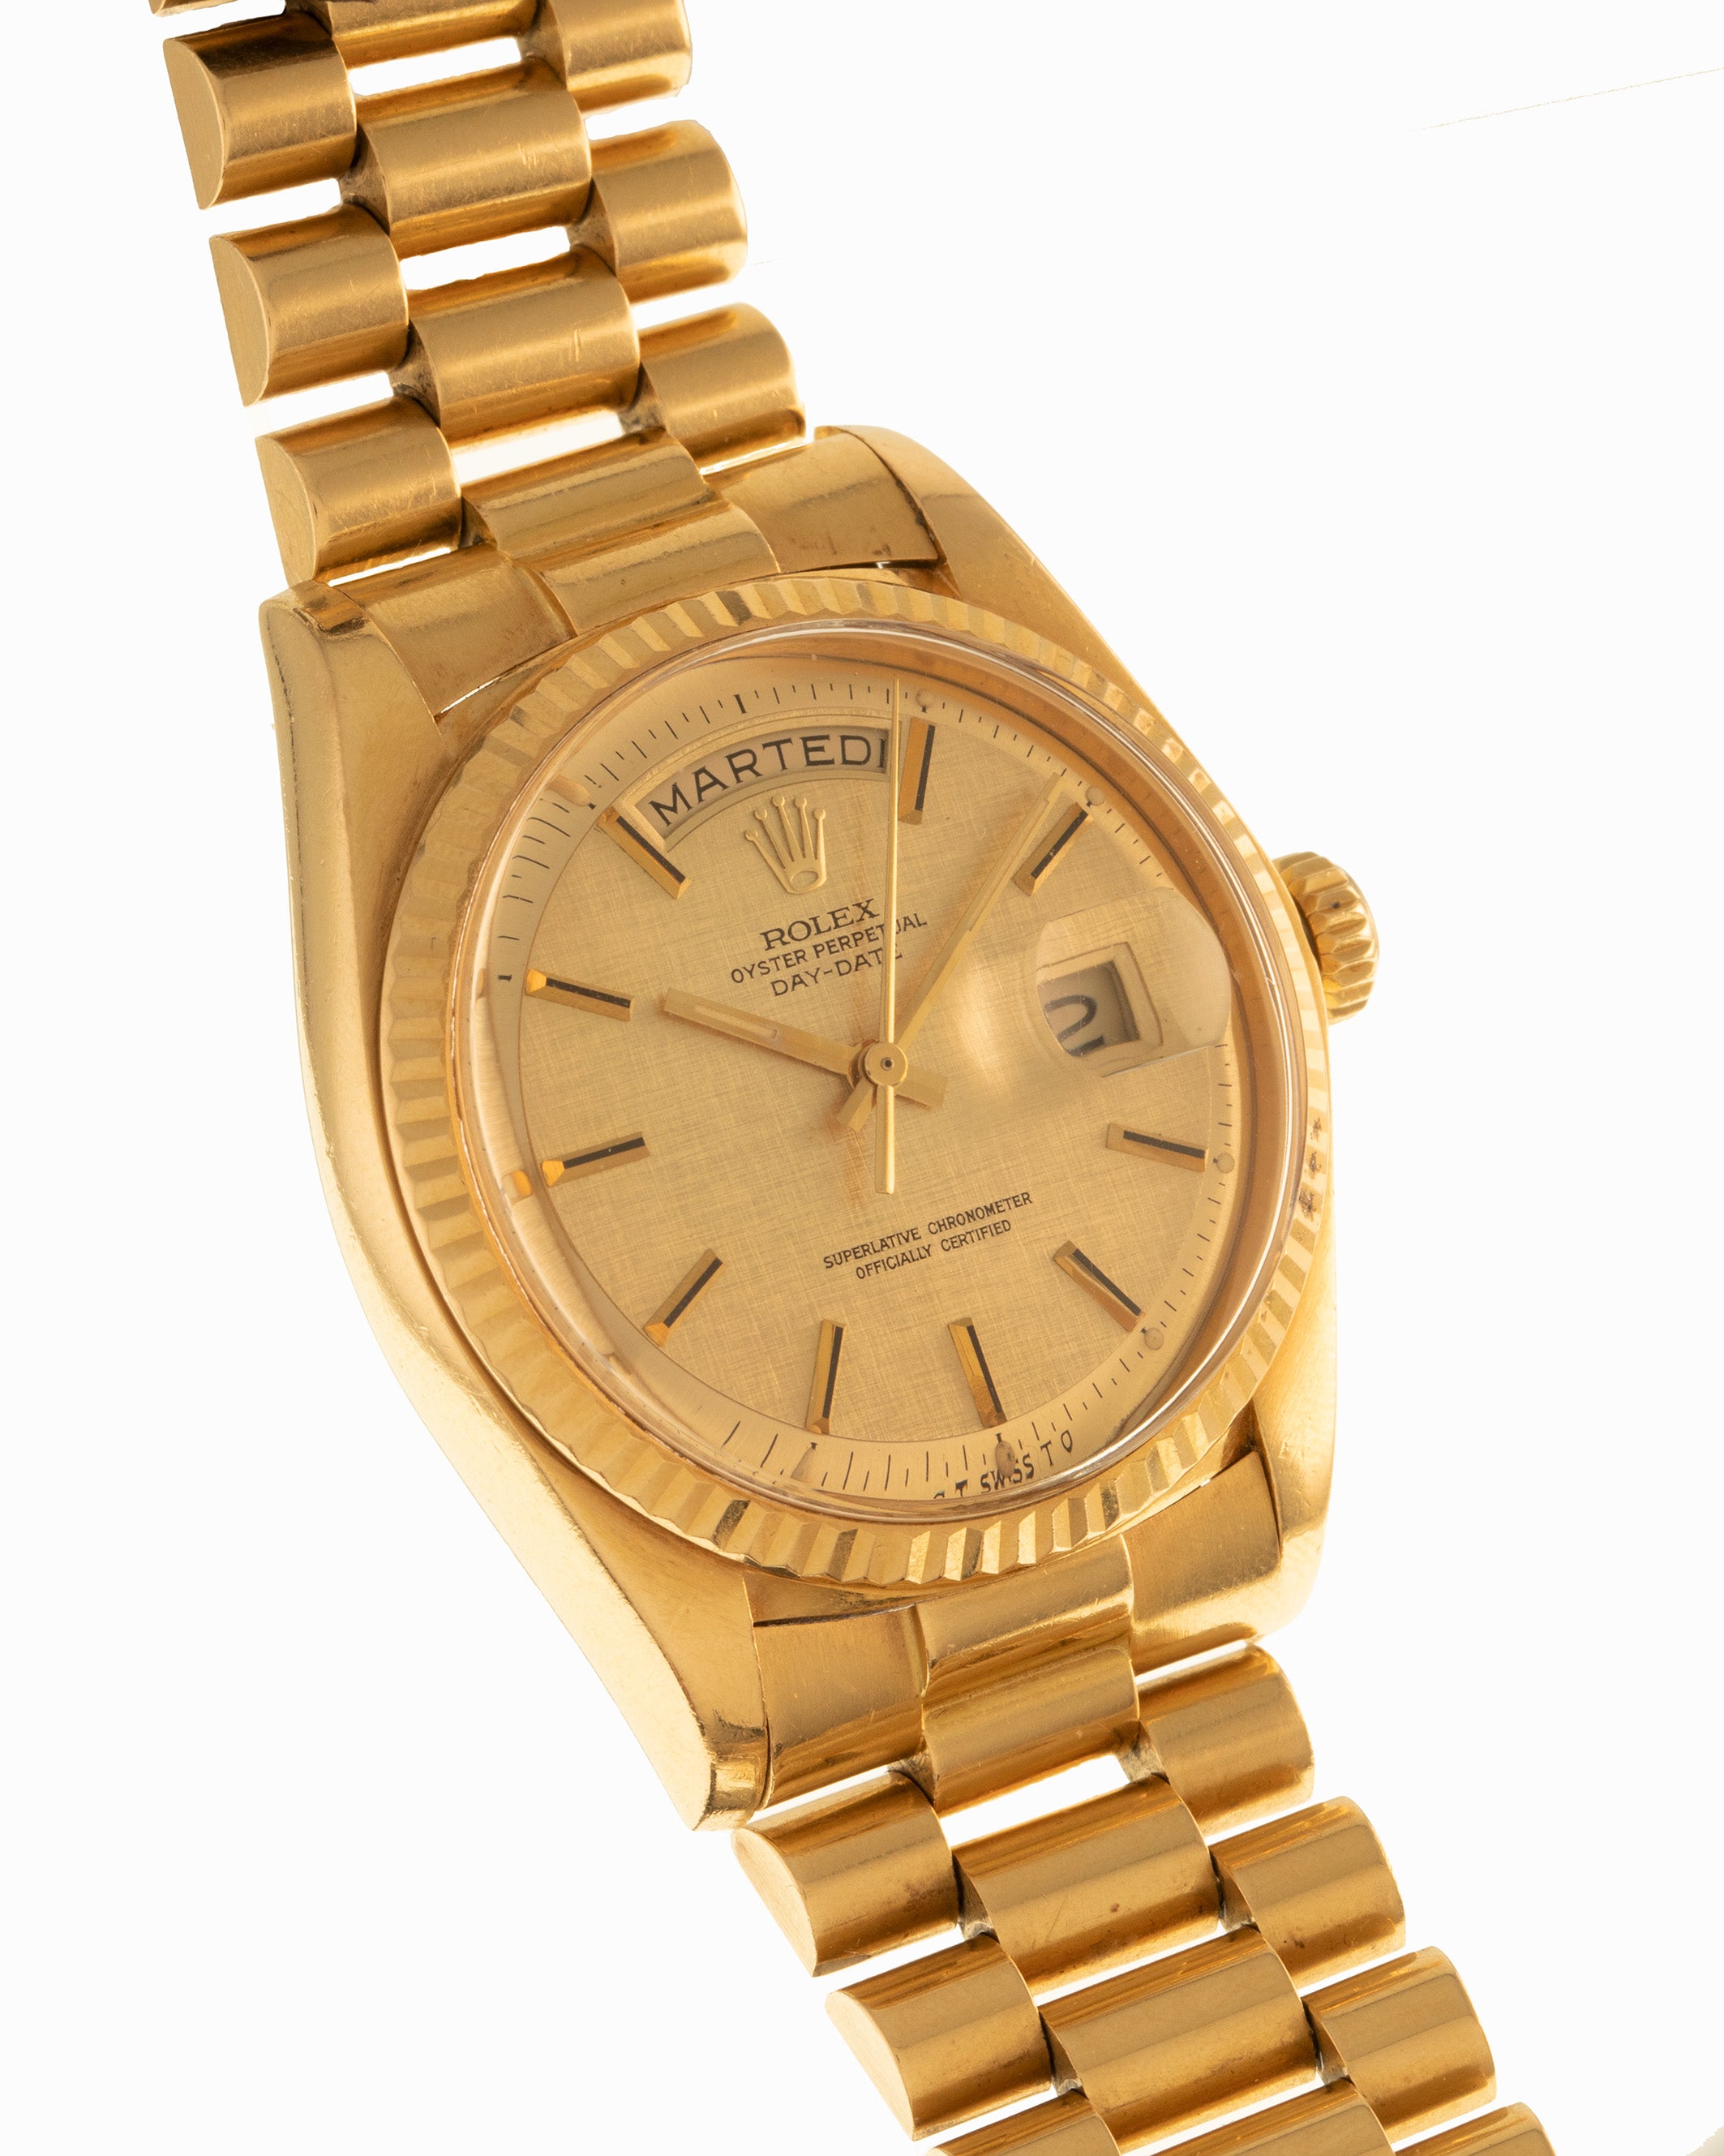 Rolex Oyster Perpetual Day Date with gold bracelet